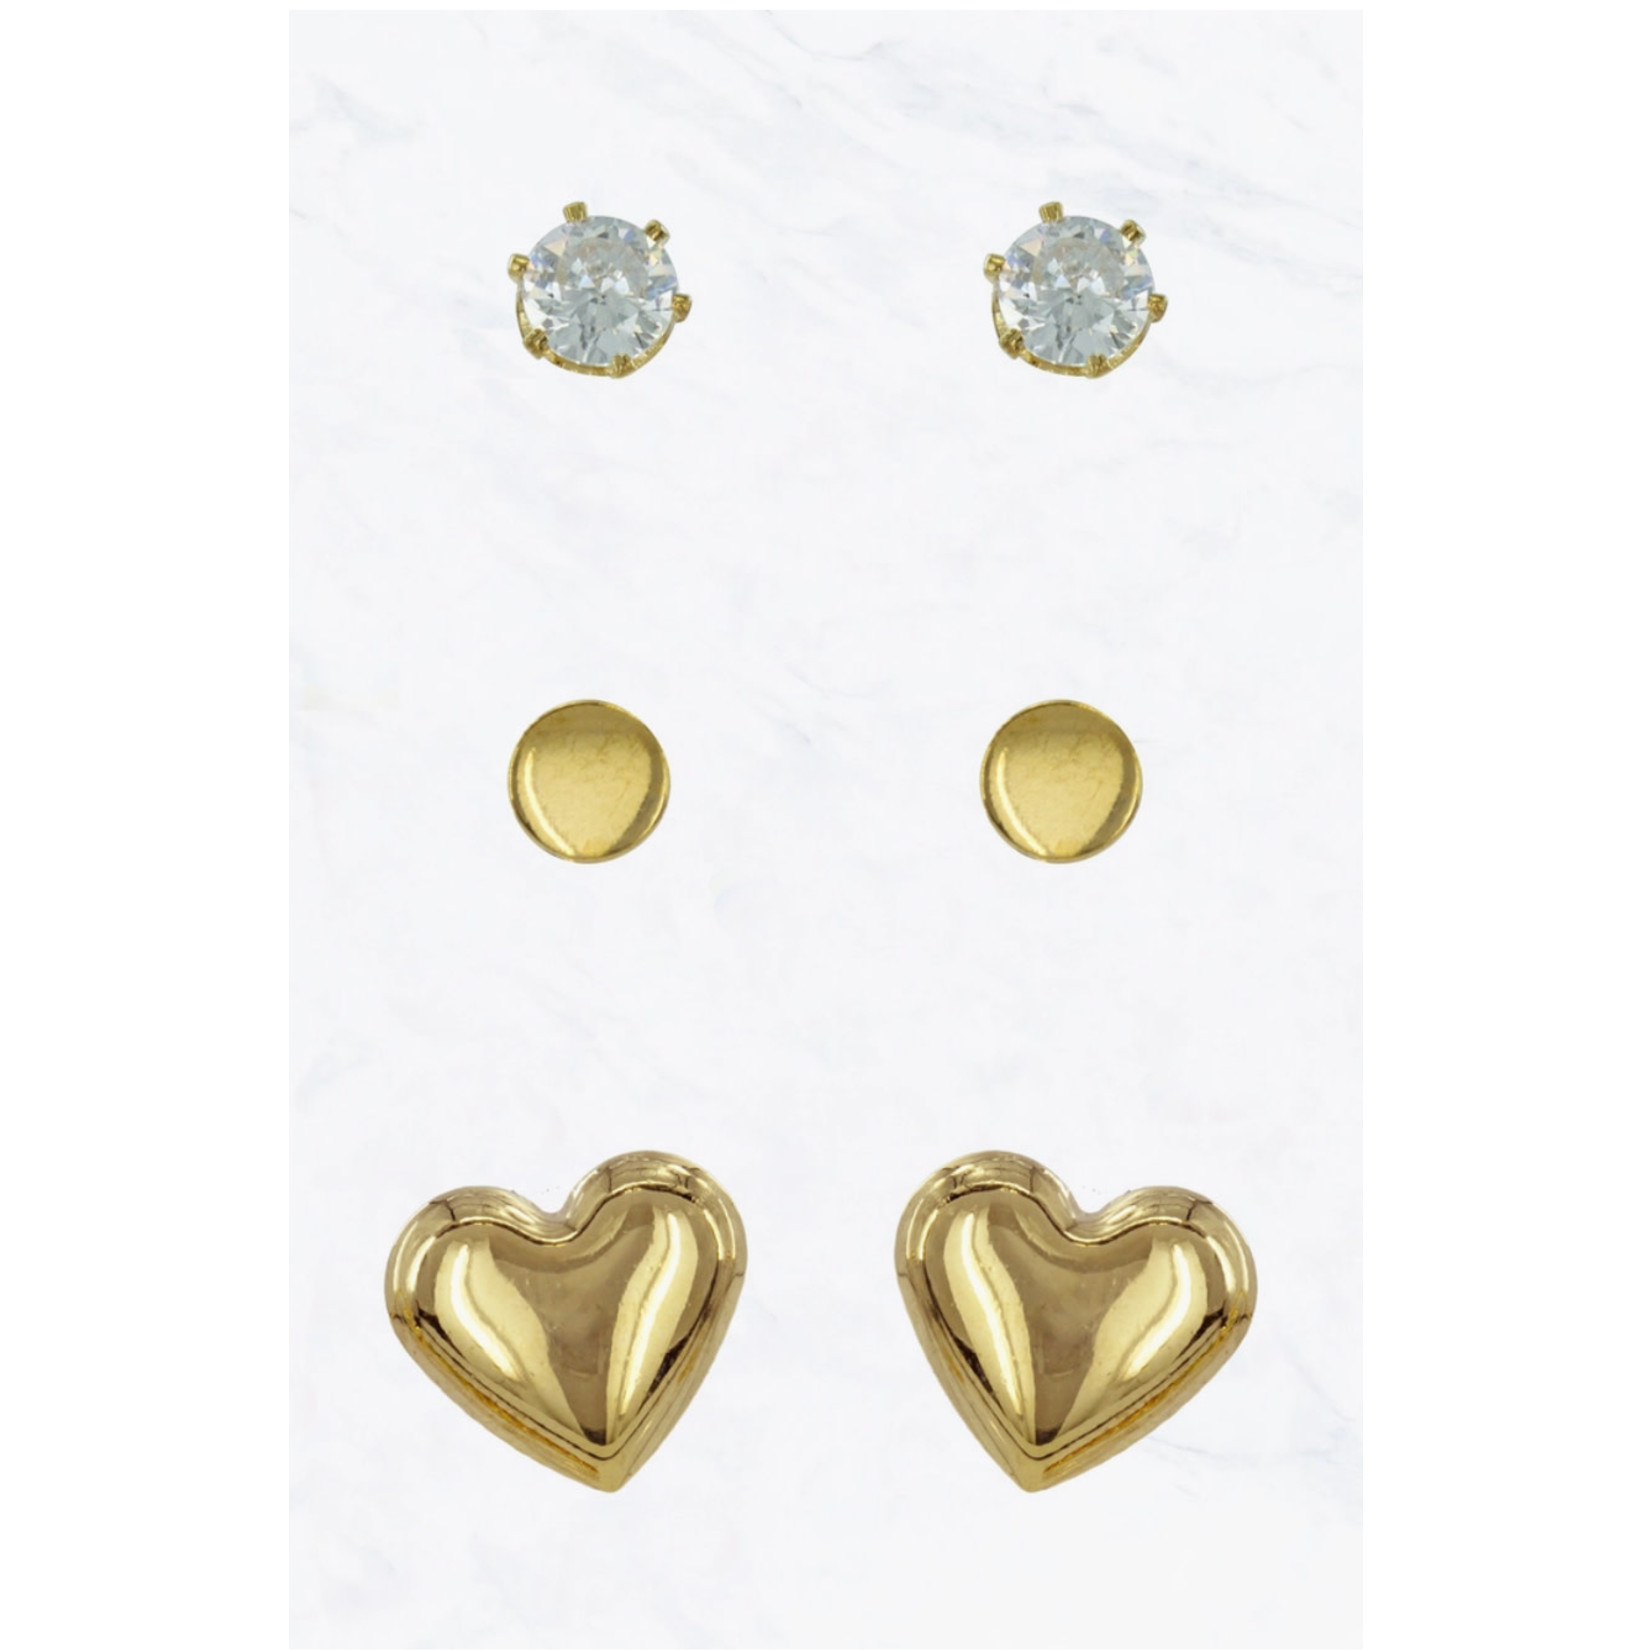 Suzie Q 3 Piece Studs with Heart Earrings Set - Gold